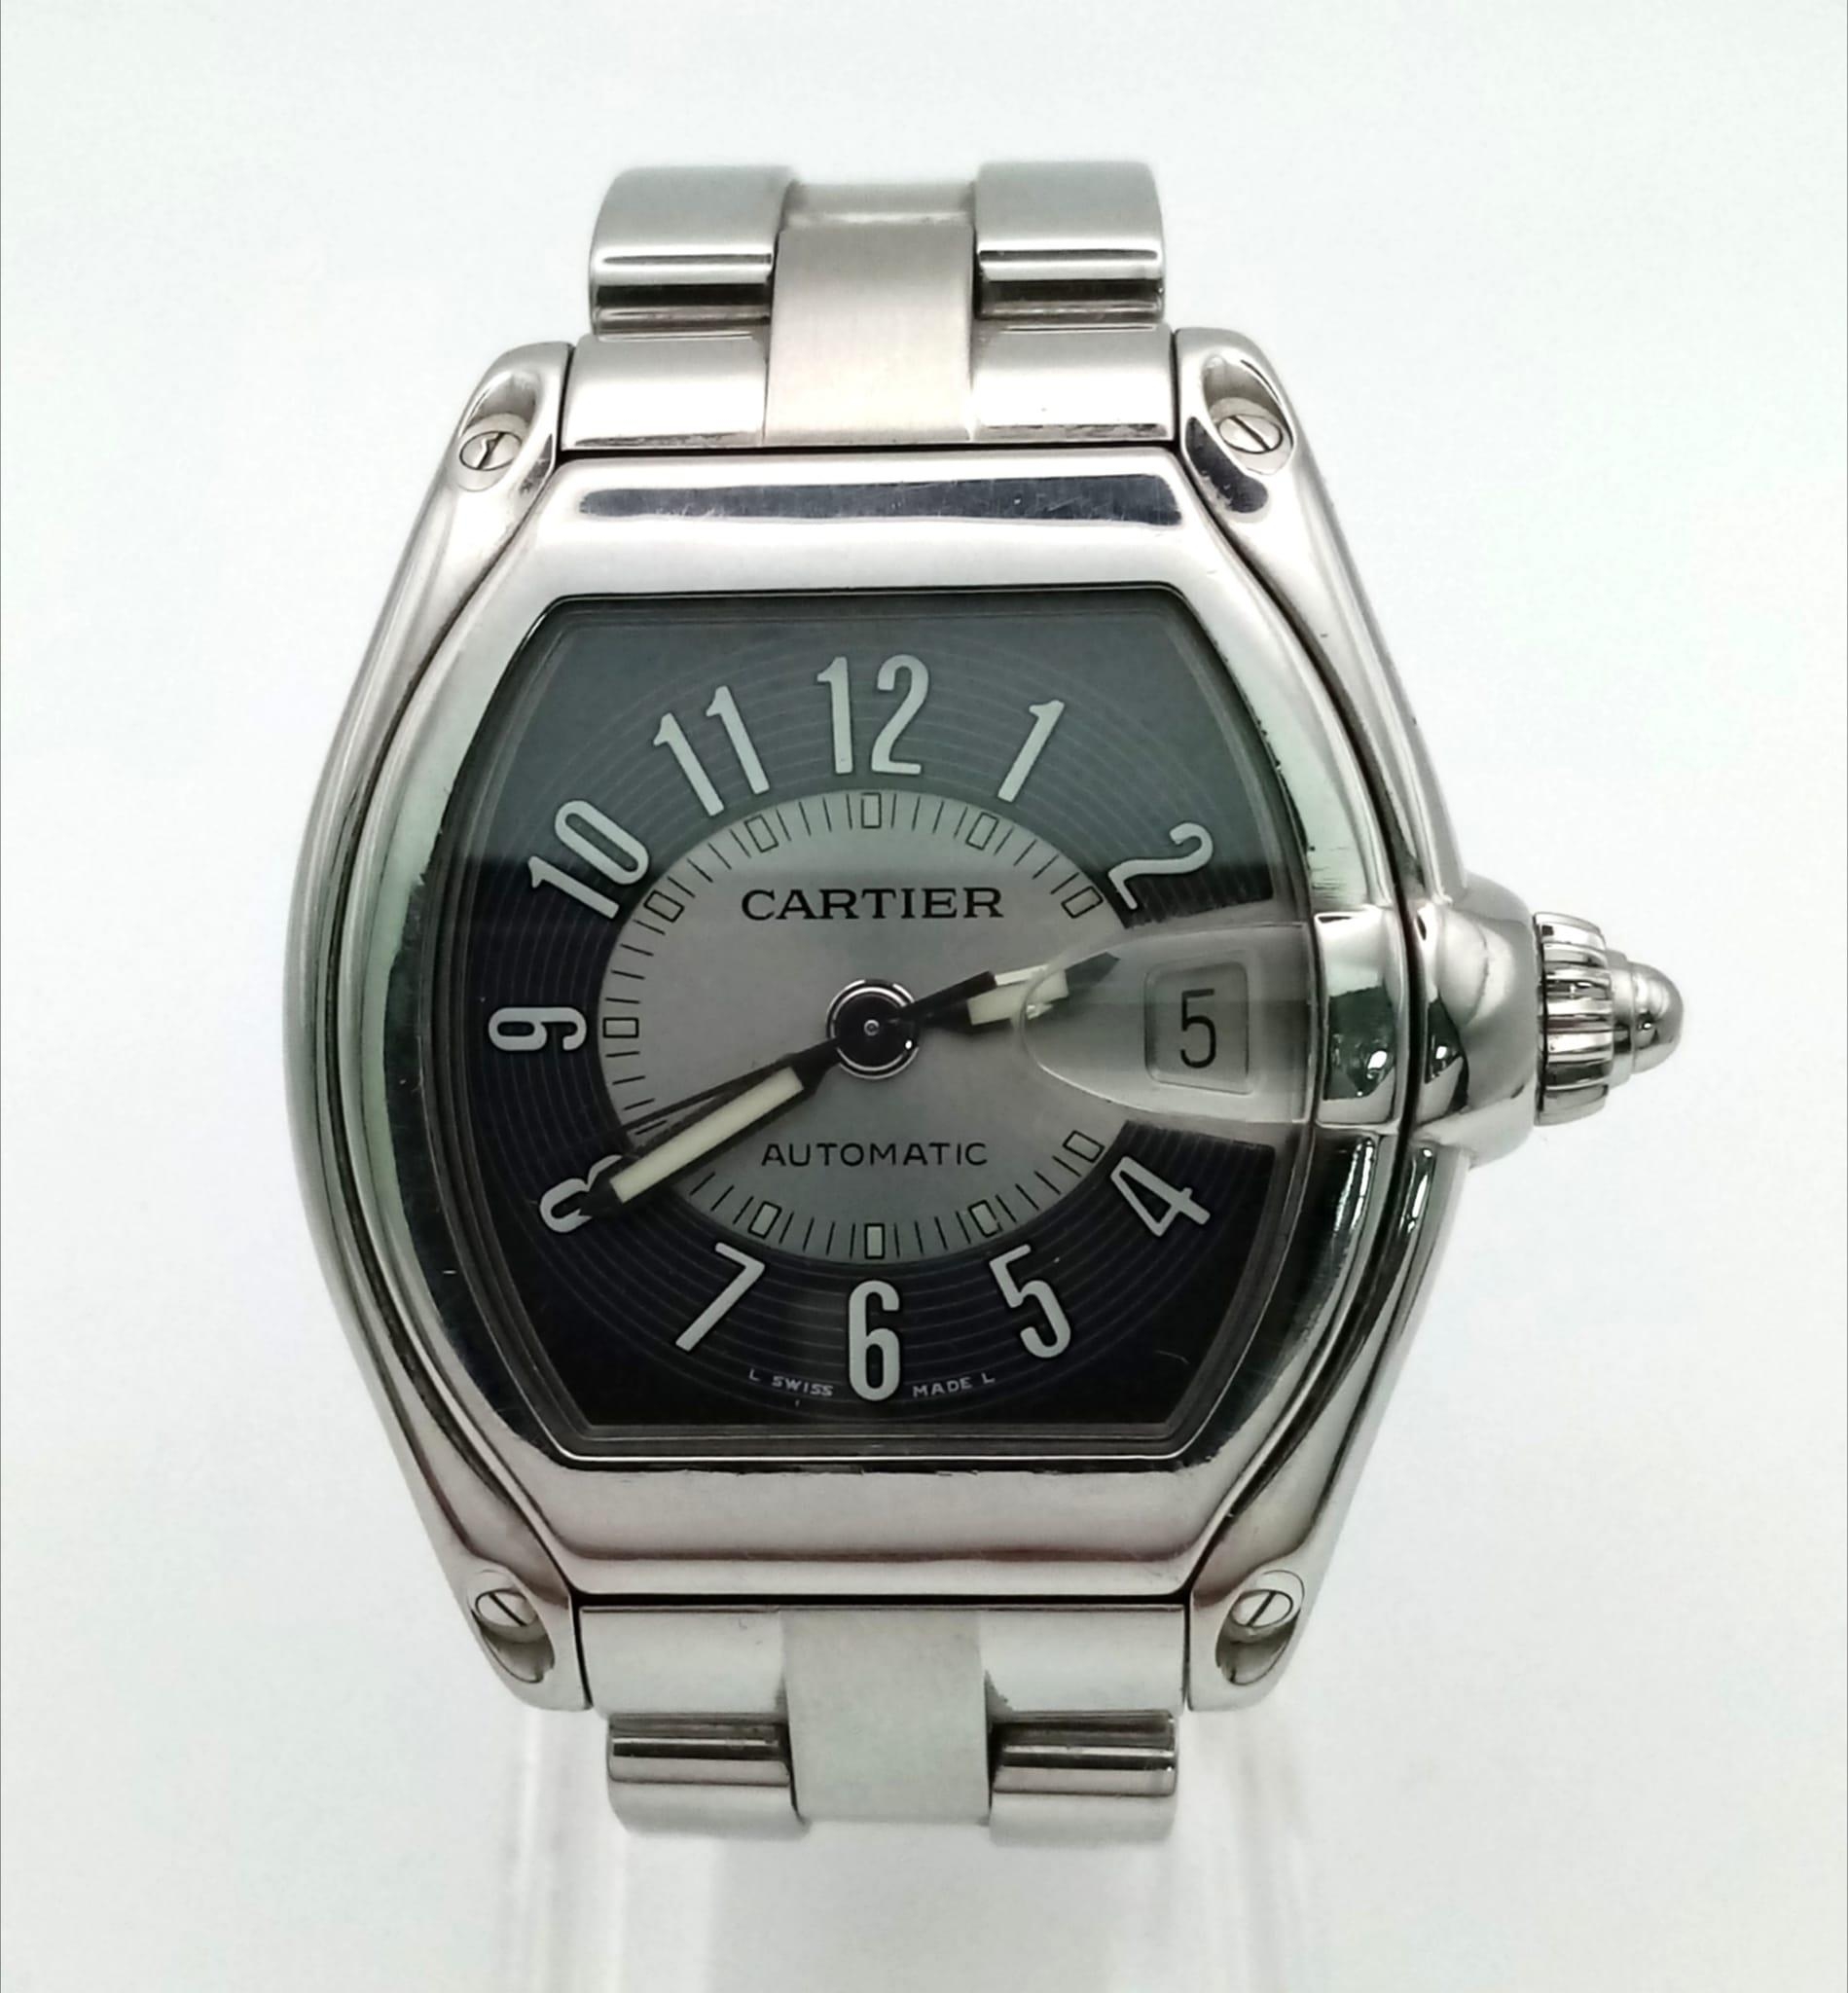 A Cartier Roadster Model 2510 Gents Automatic Watch. Stainless steel strap and case - 36mm. Two tone